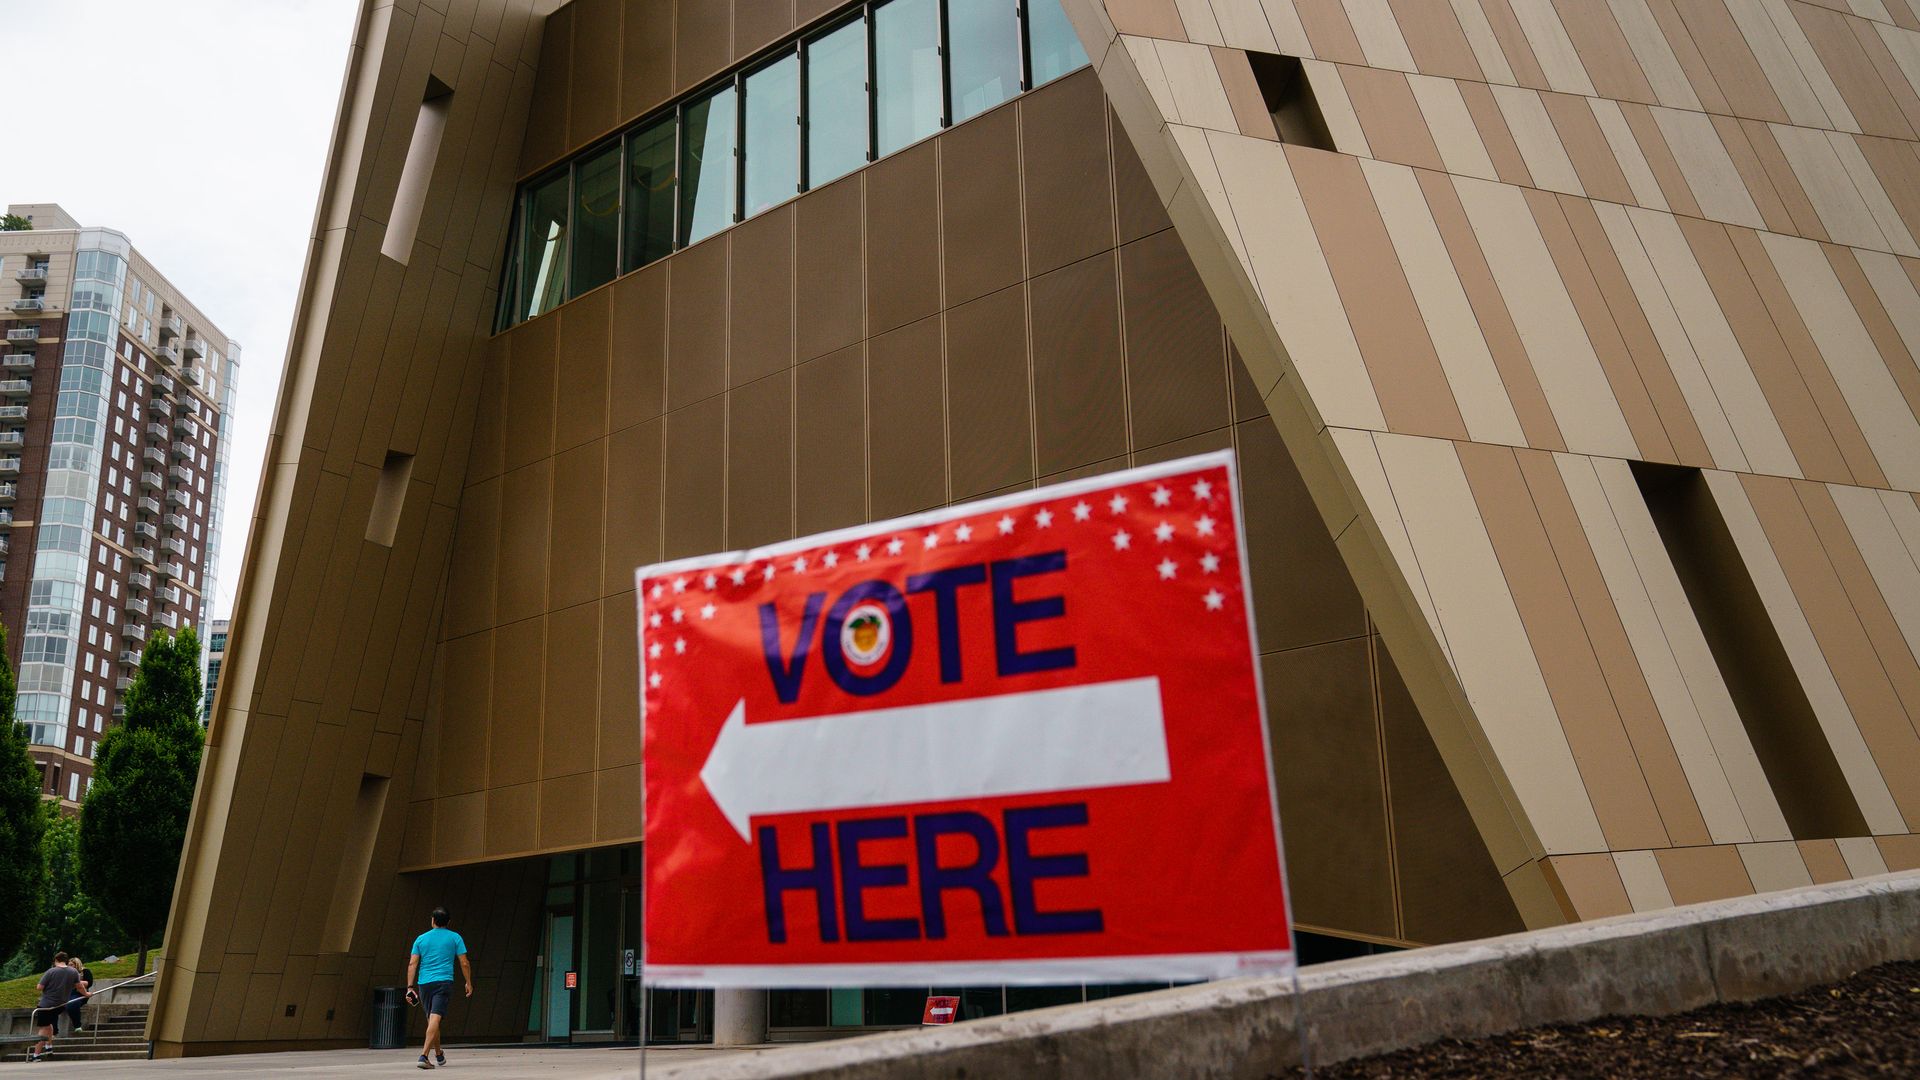 Photo of a "Vote here" sign outside a building